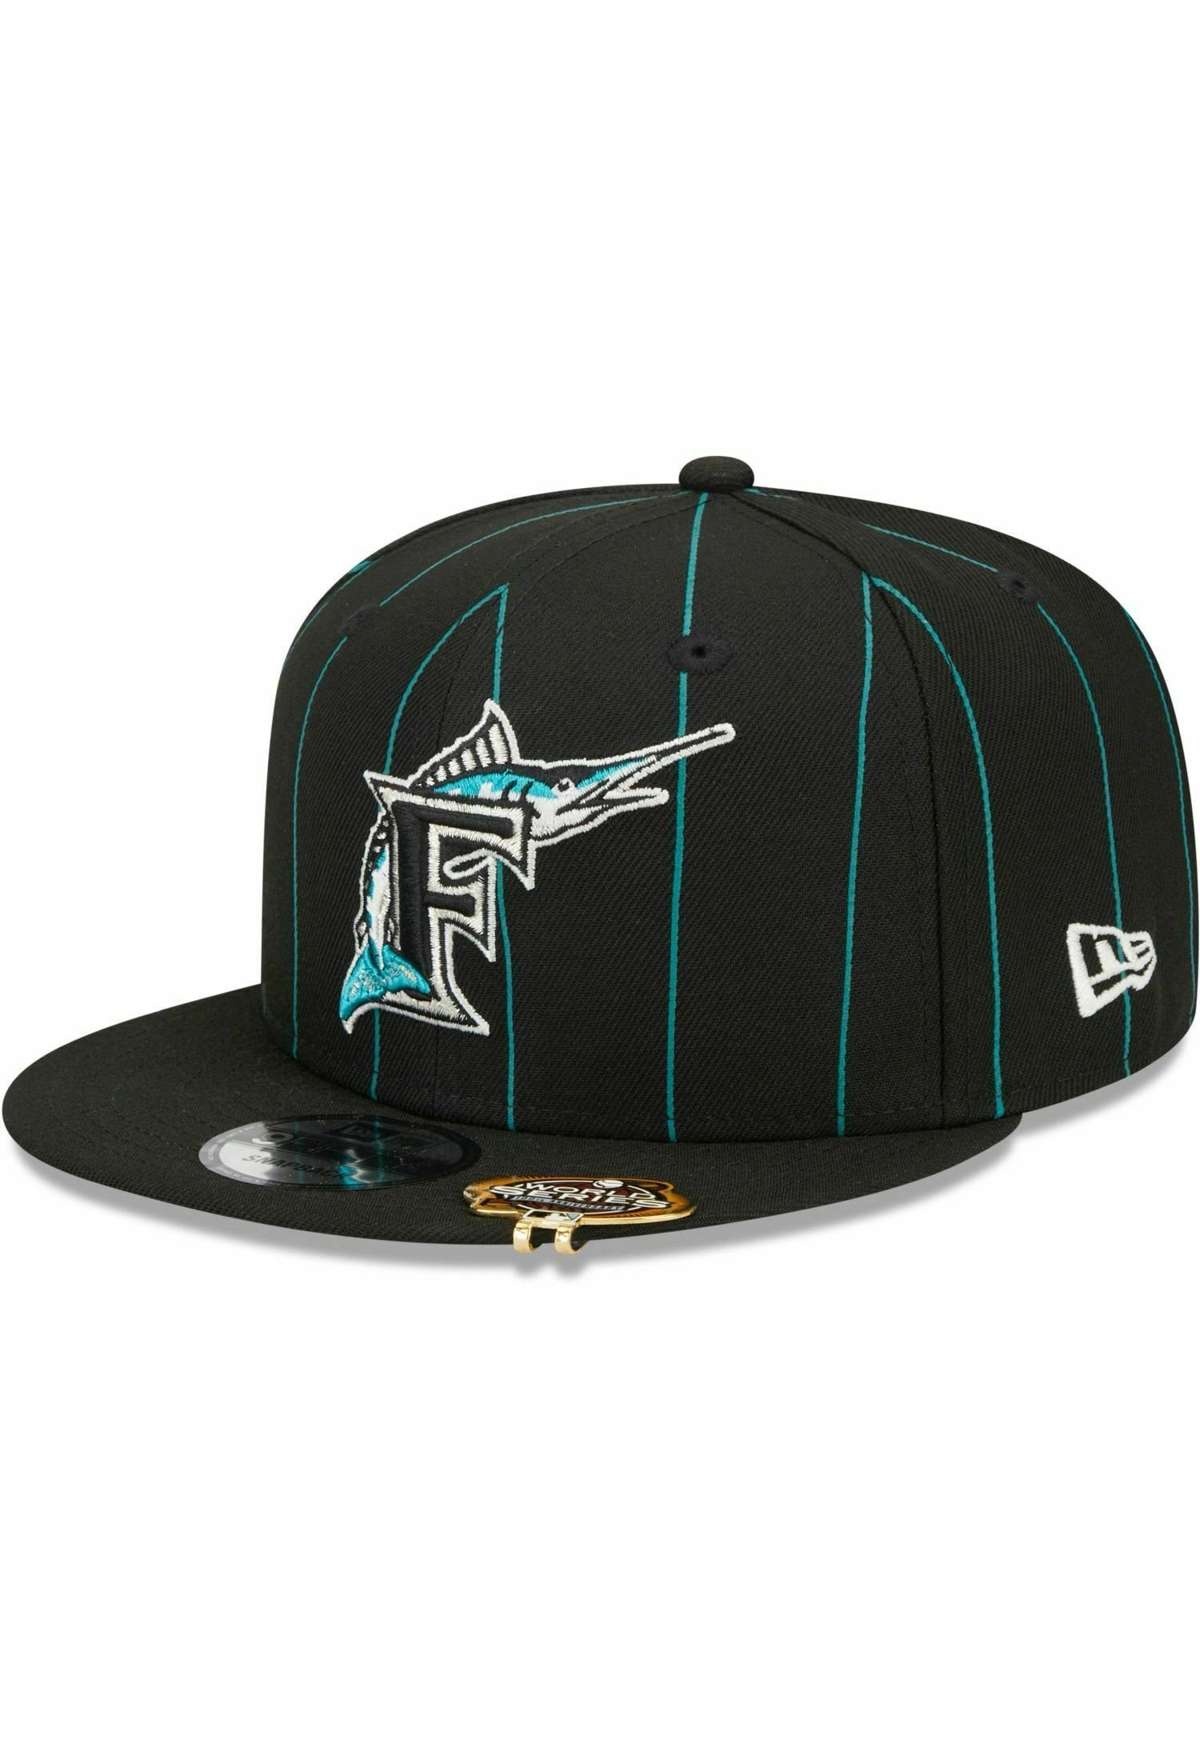 Кепка 9FIFTY FLORIDA MARLINS